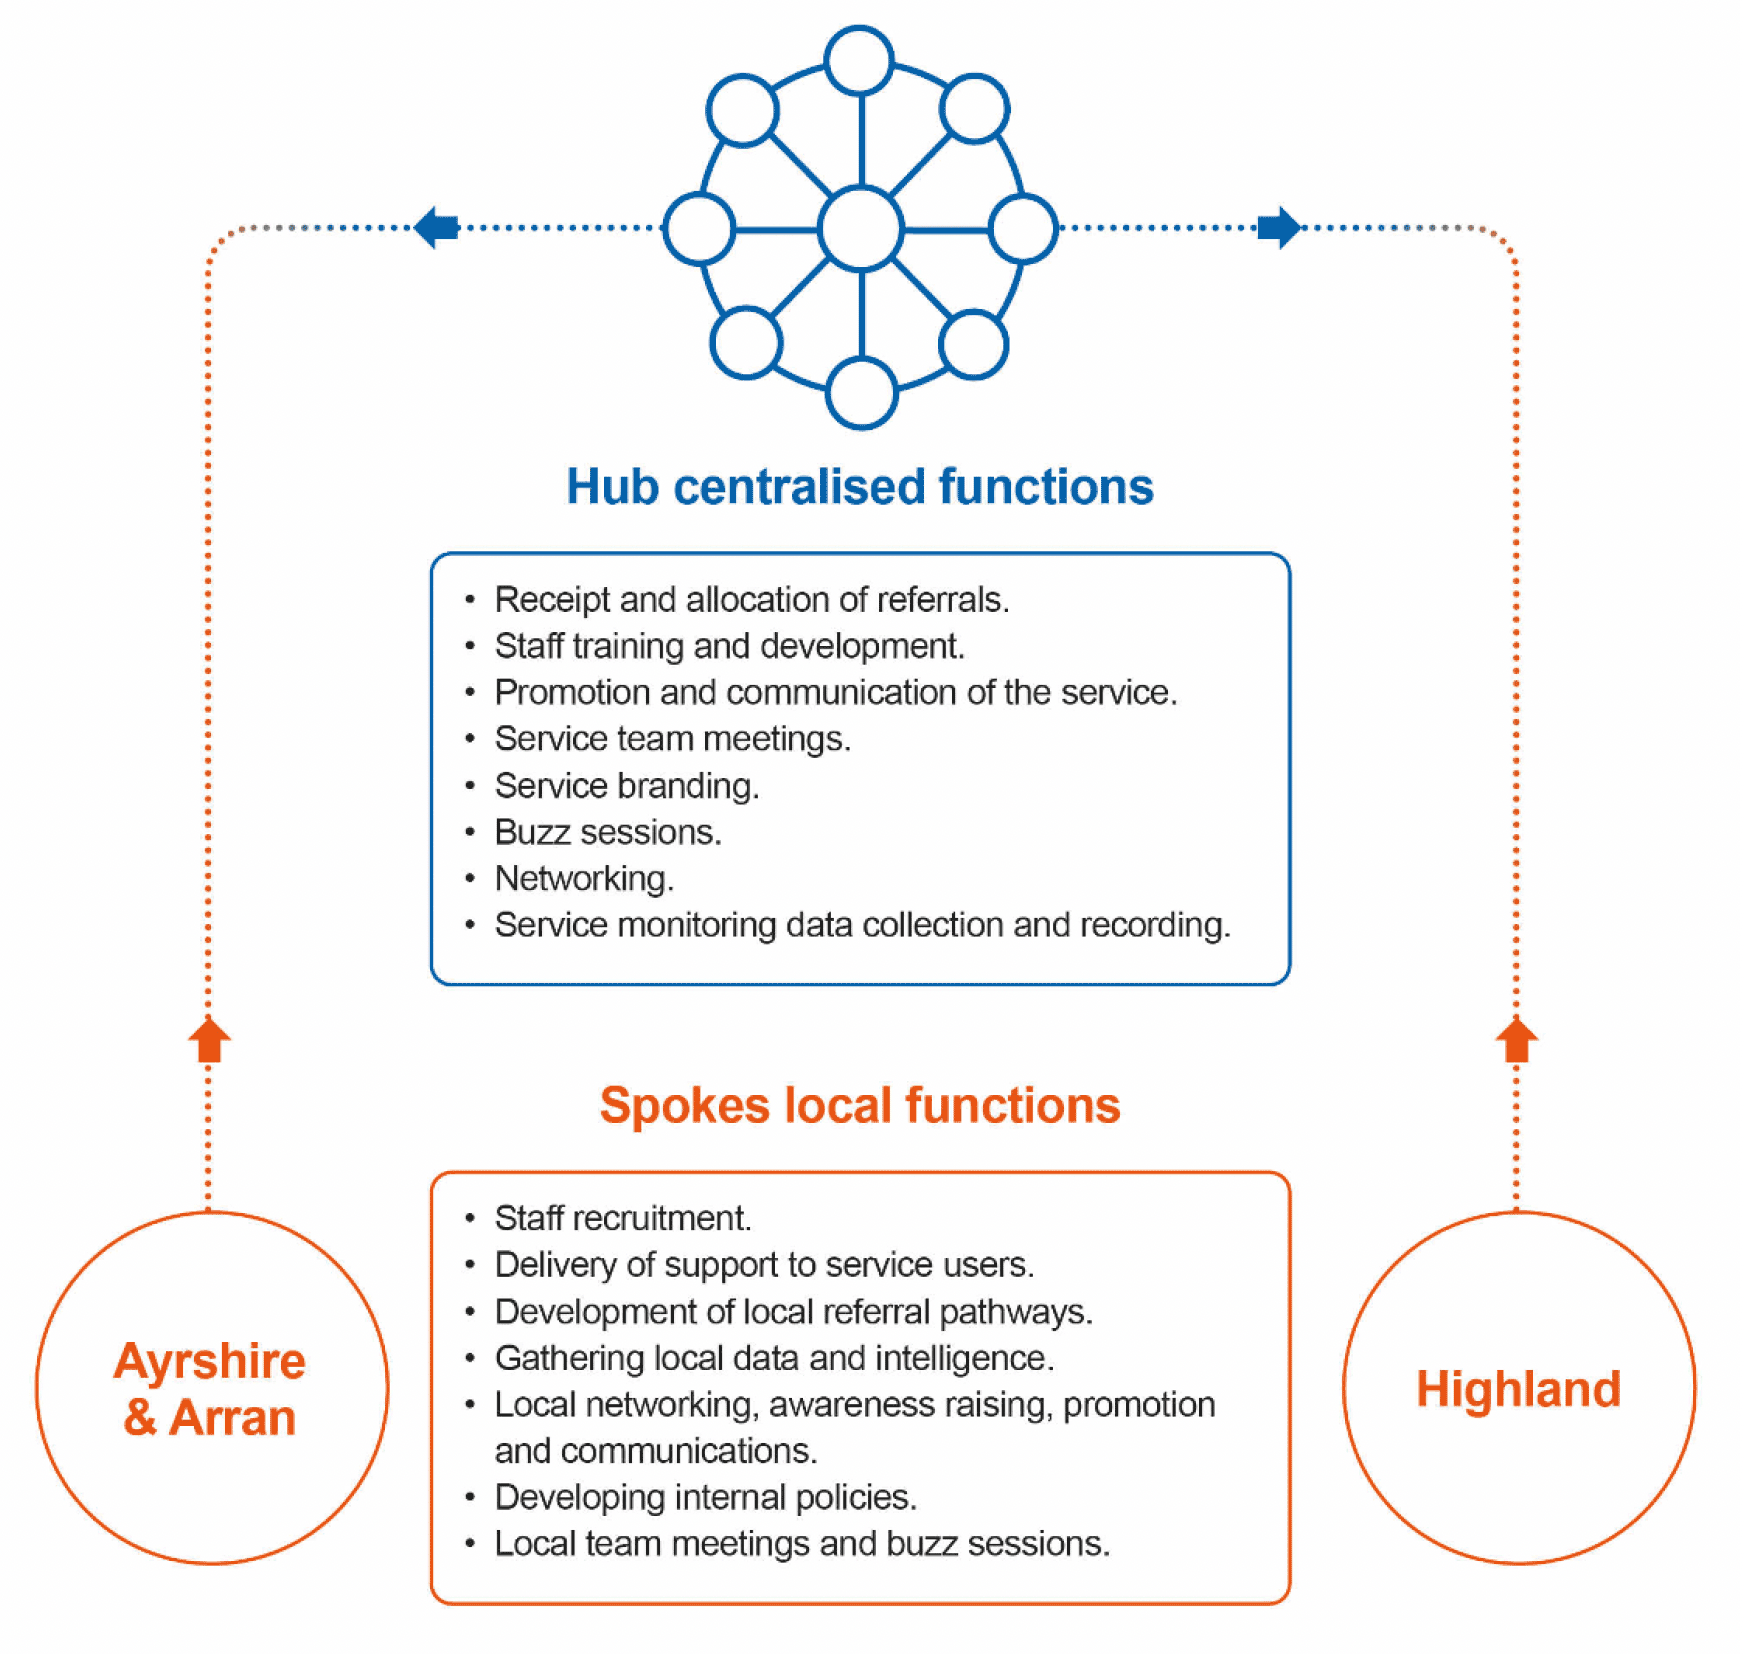 Infographic setting out the functions undertaken centrally, and the functions undertaken locally in each service delivery area through the hub and spoke model.